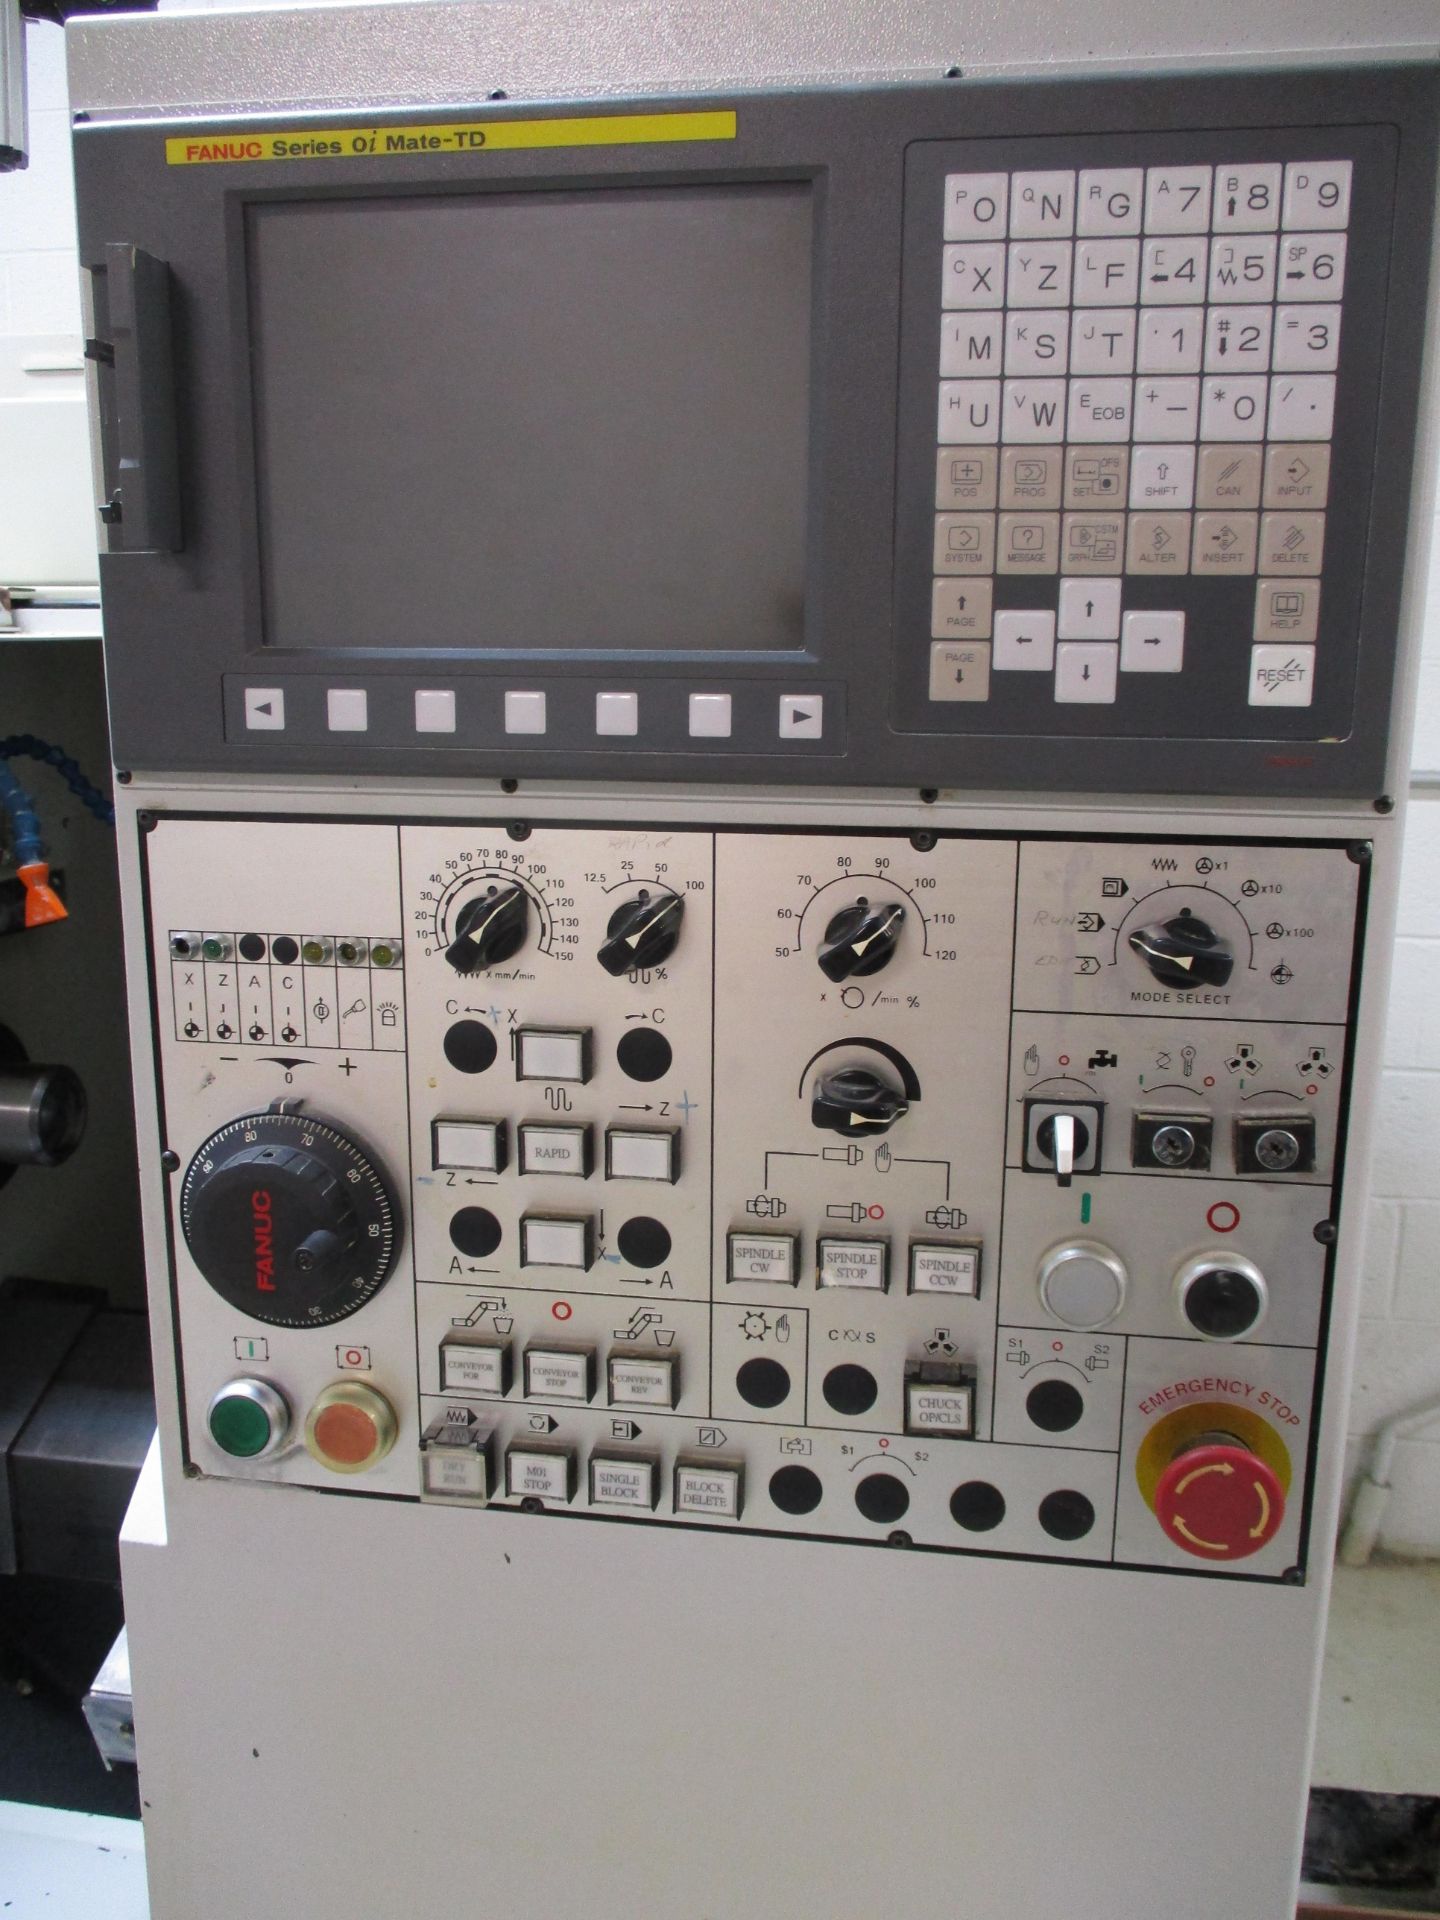 Cubic Model PLG-42L Gang Tooling CNC Lathe, SN 4202428, with Fanuc Series 0i Mate-TD CNC Control, - Image 3 of 13